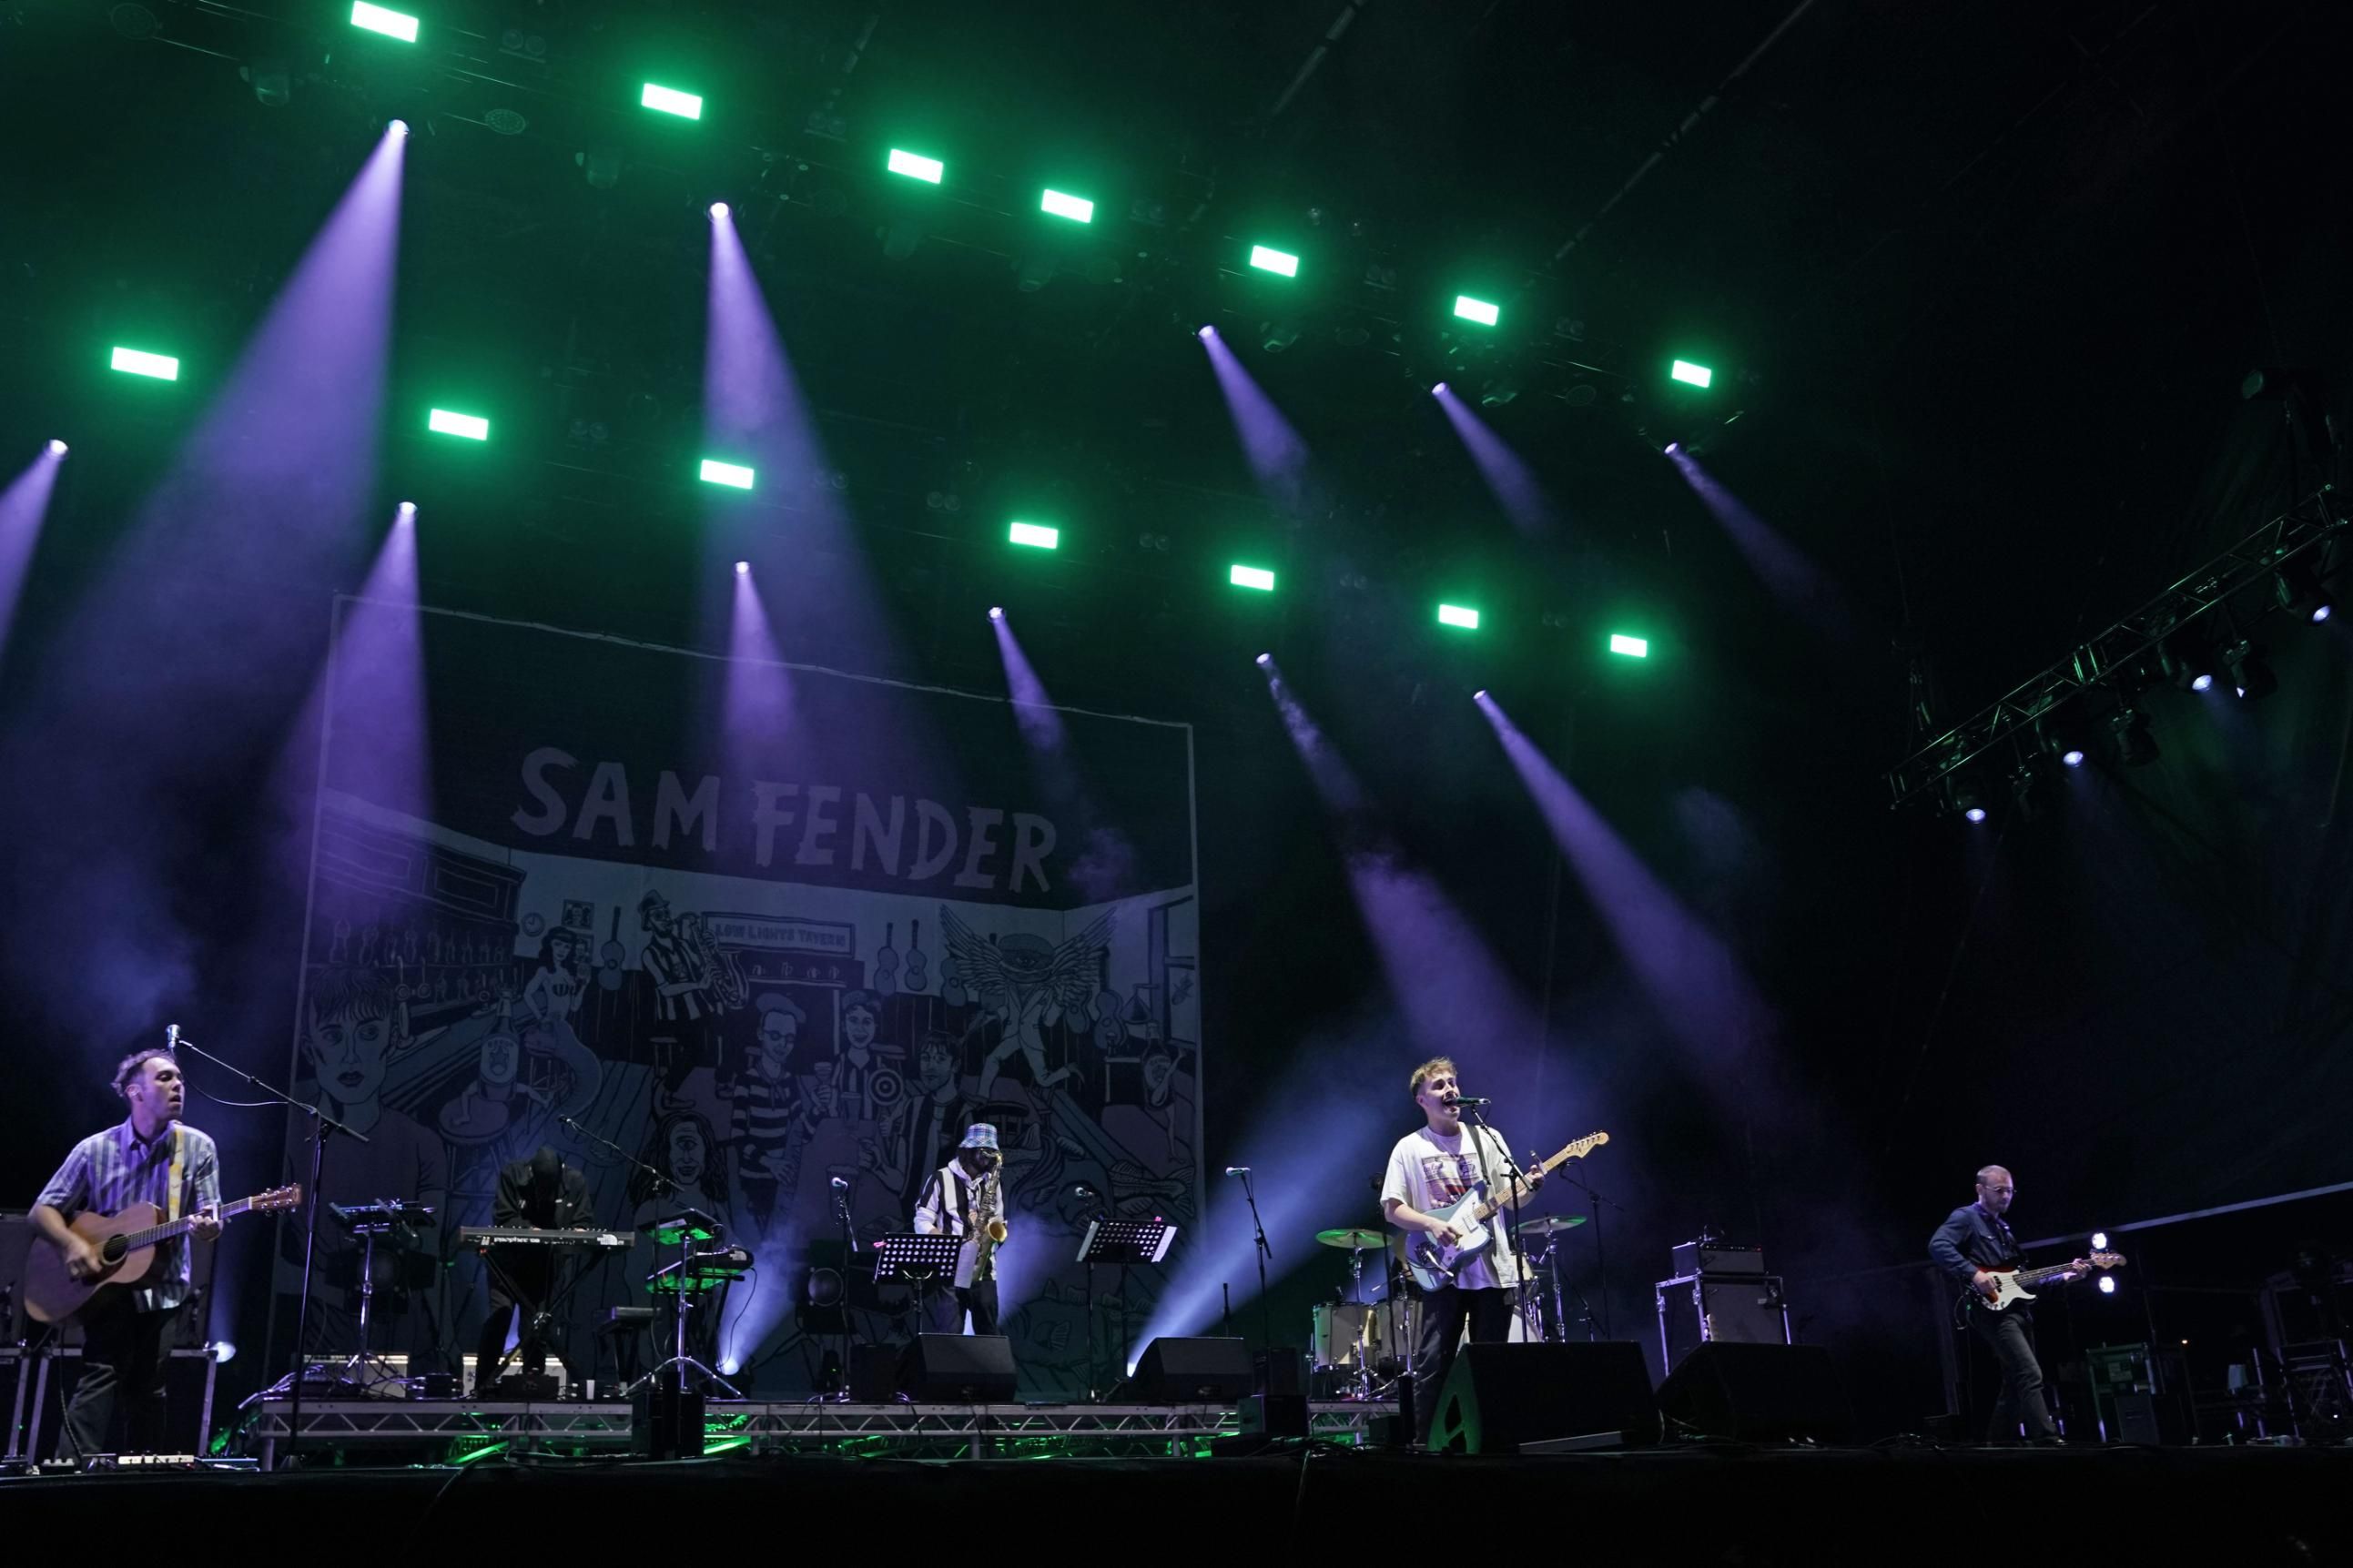 sam fender plays the first socially distant concert